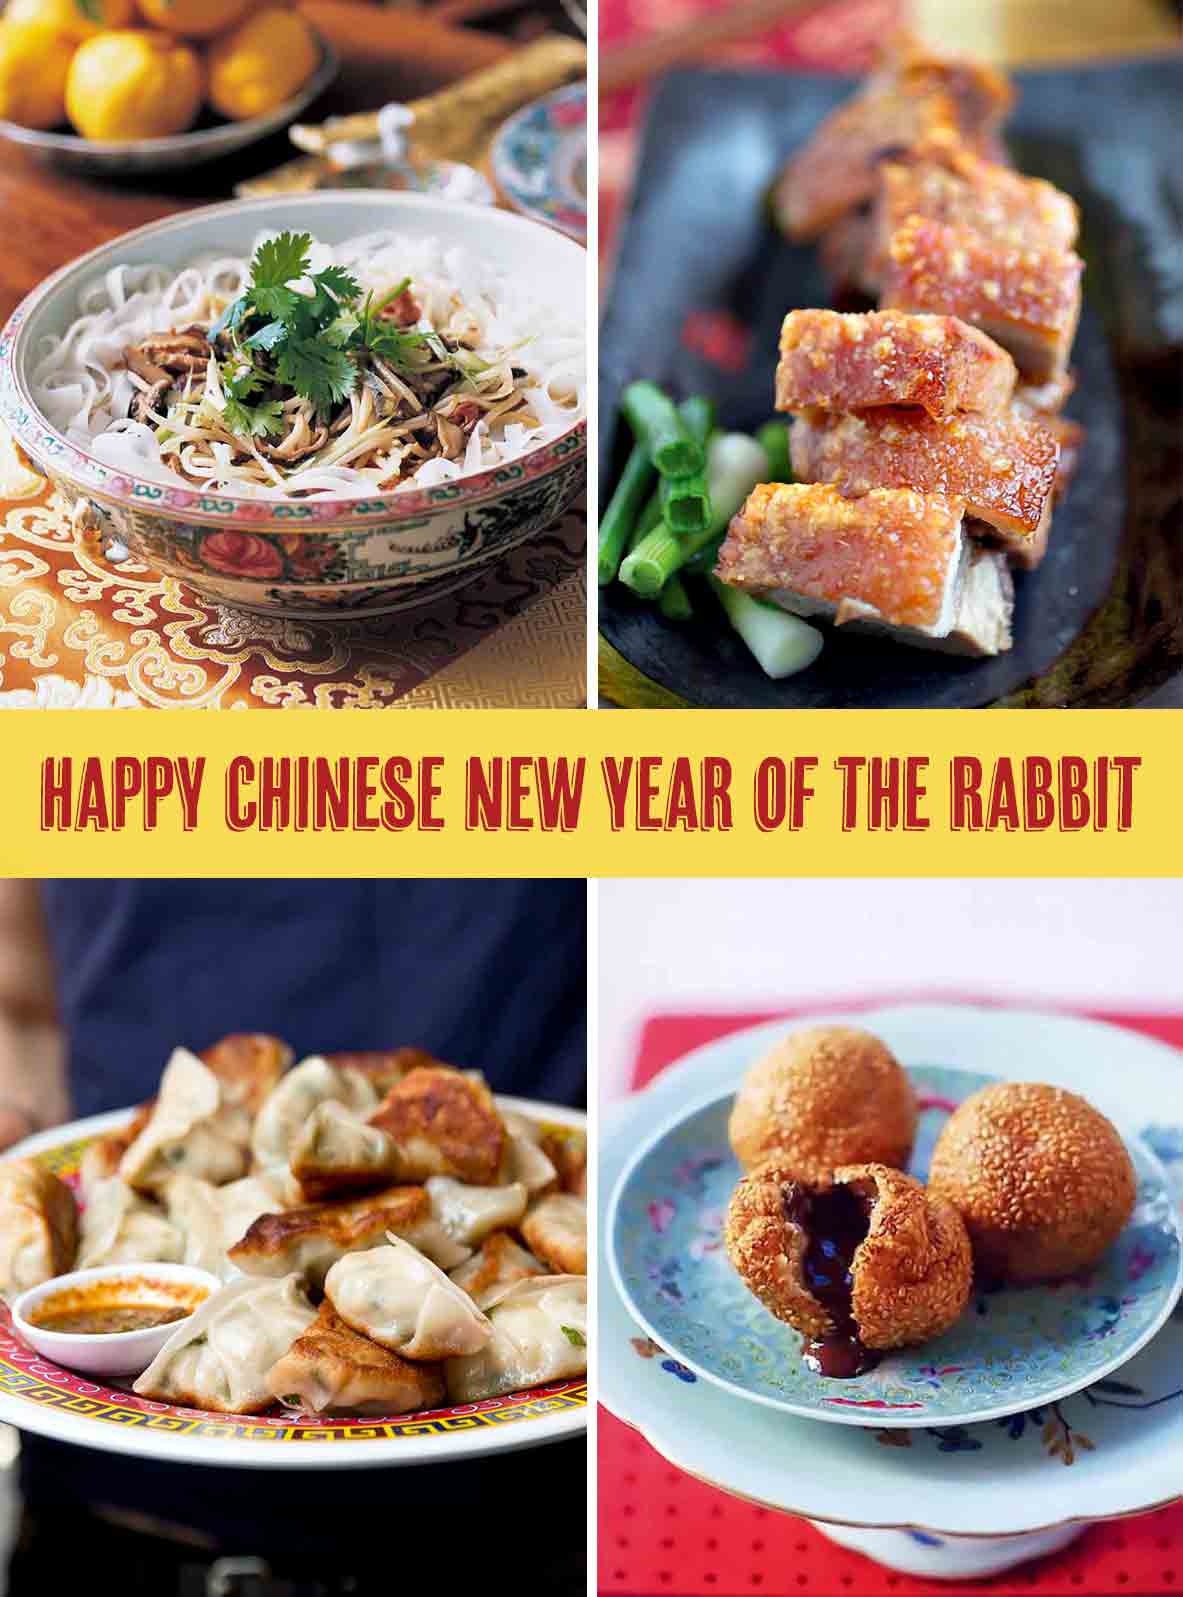 Four images: Chinese noodles in a bowl, roasted pork belly on a black plate, a man's hands holding pork dumplings, sesame pastry balls filled with chocolate.